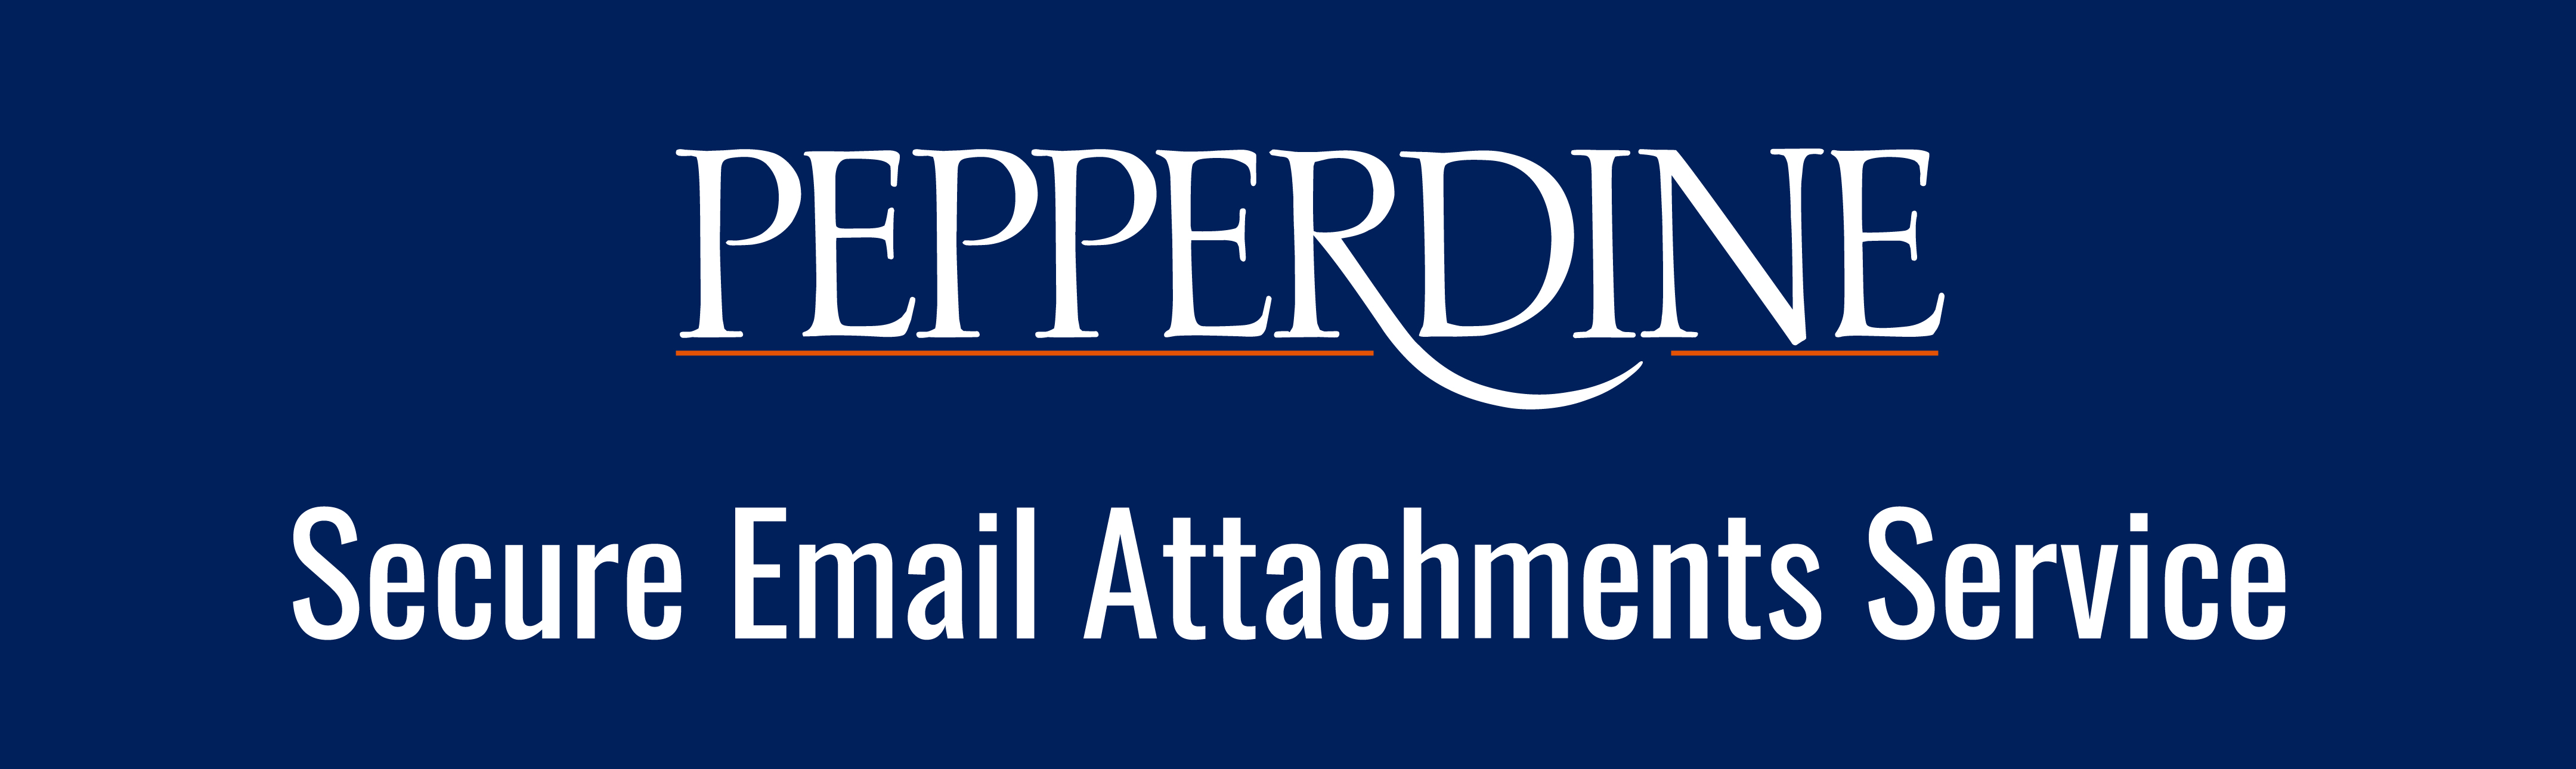 Pepperdine Secure Email Attachments